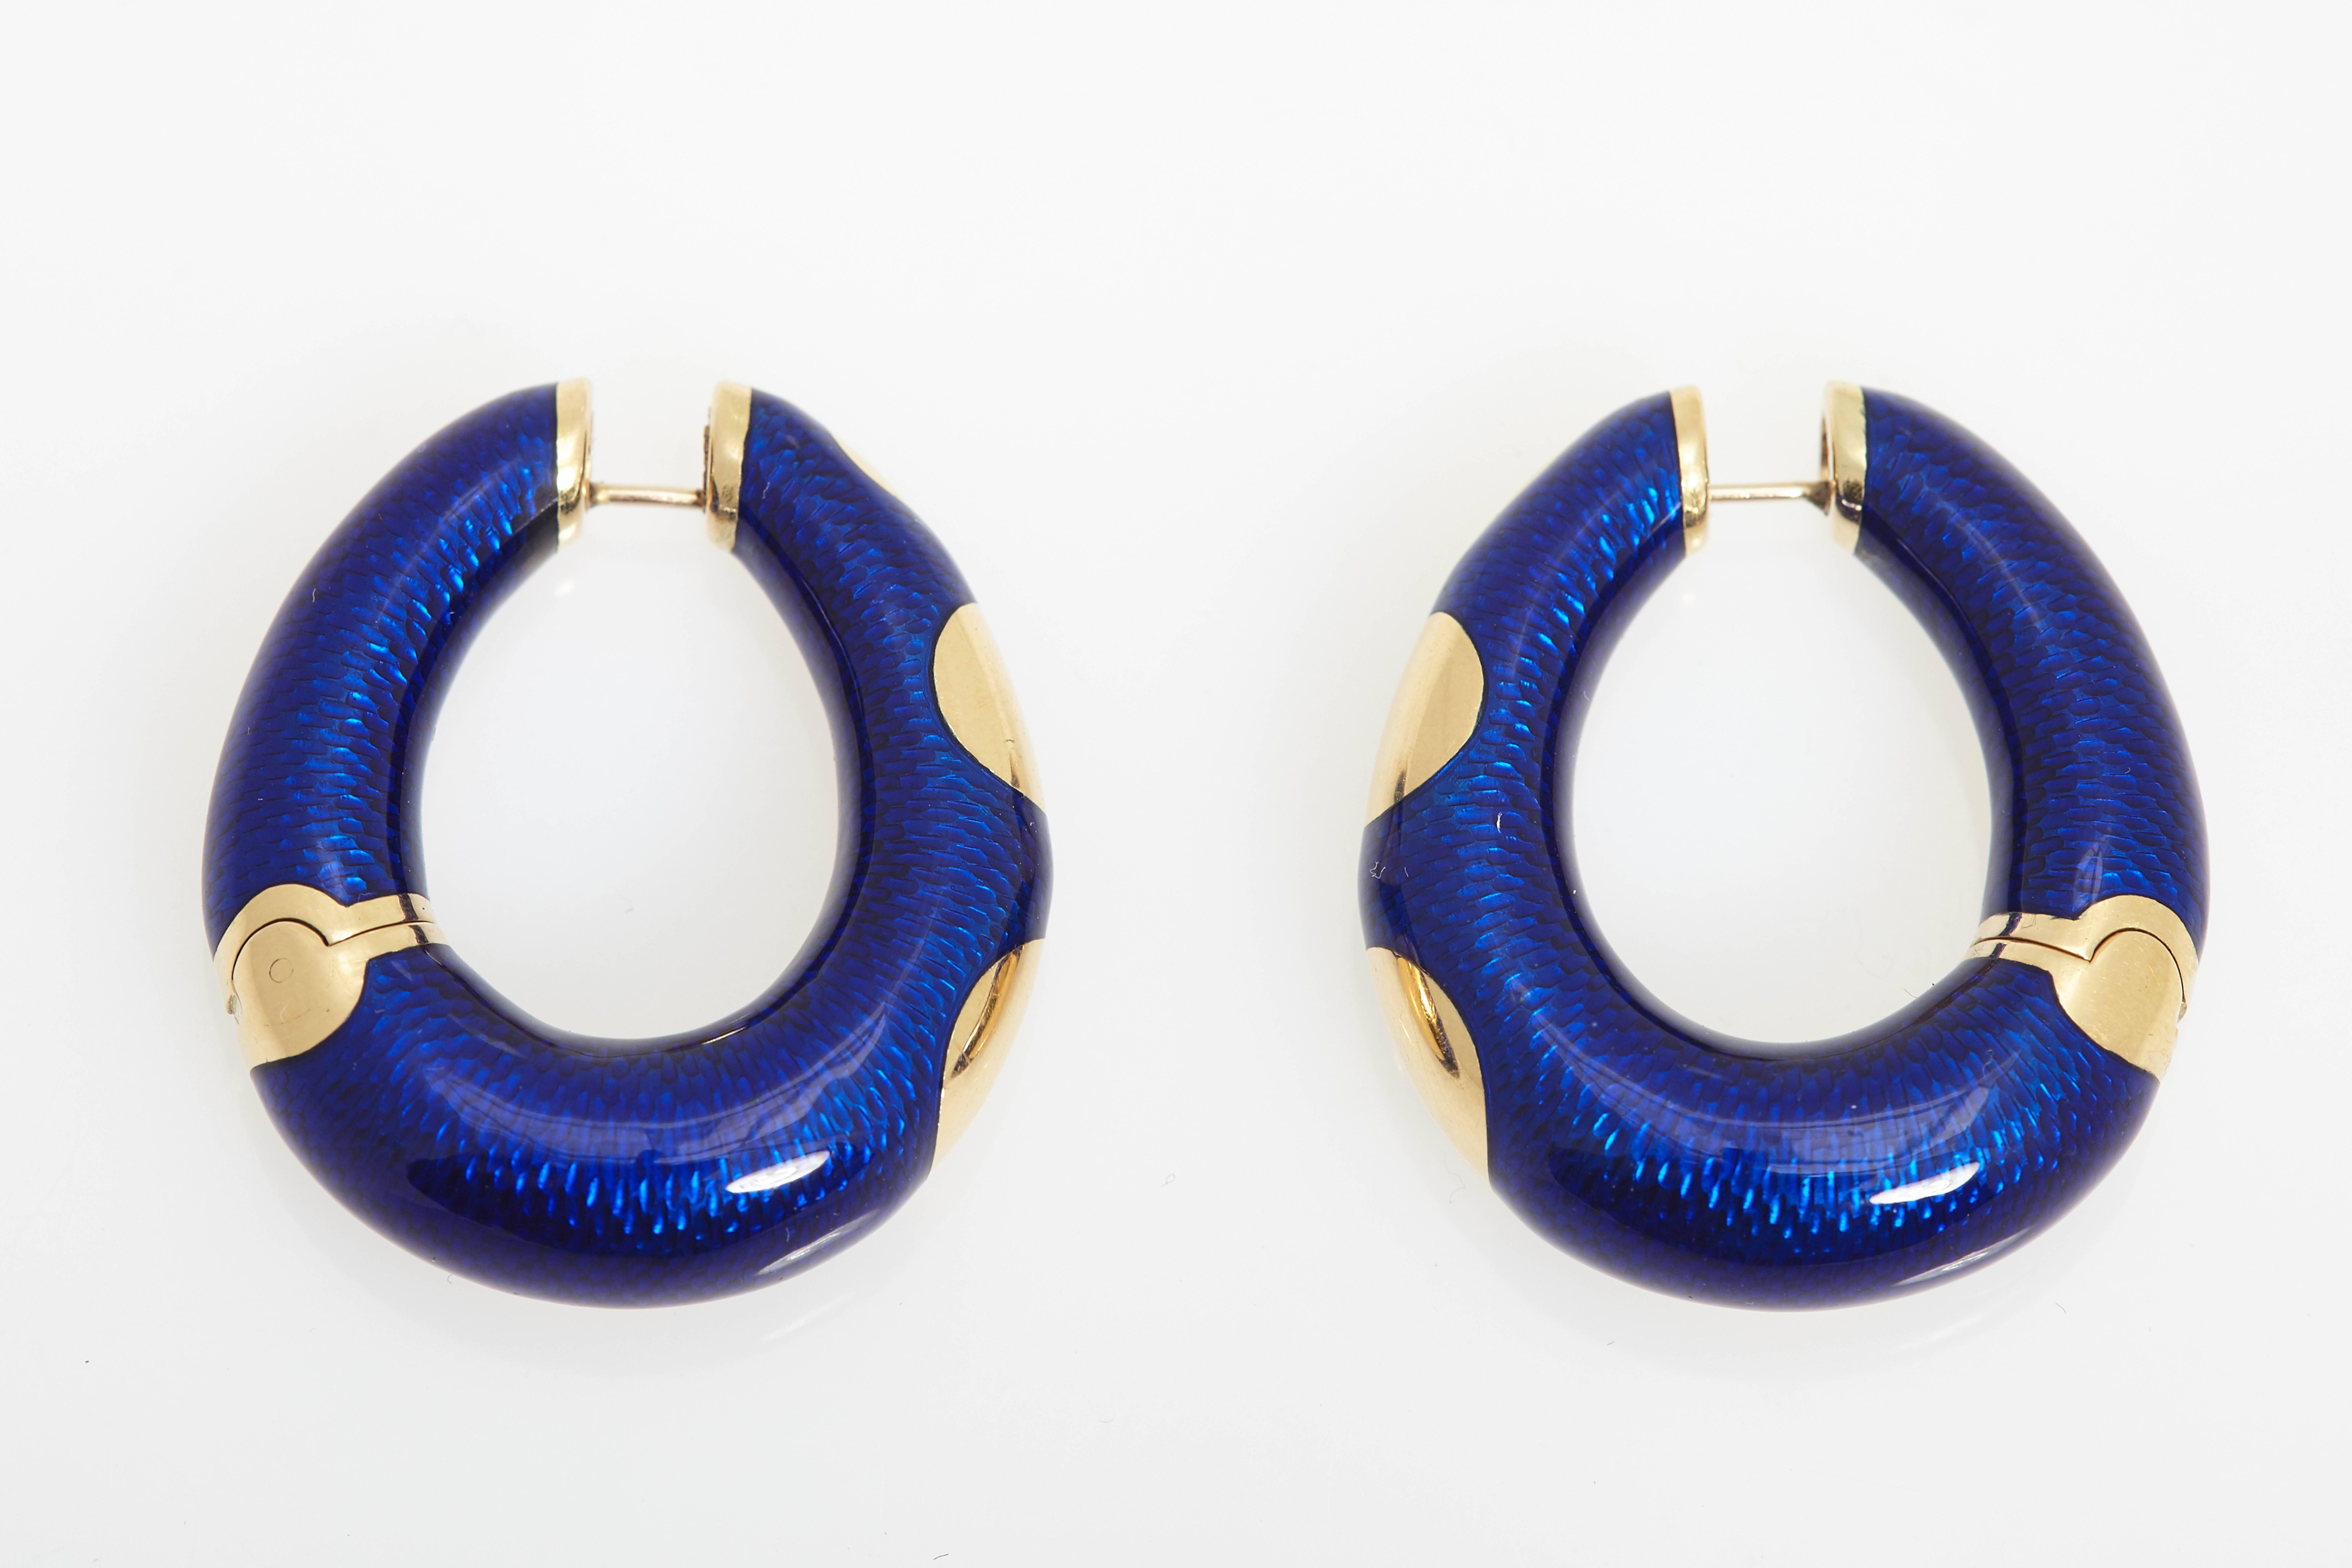 A pair of chic 18kt yellow gold earrings, decorated fine blue enamel. By Bulgari, circa 1975.